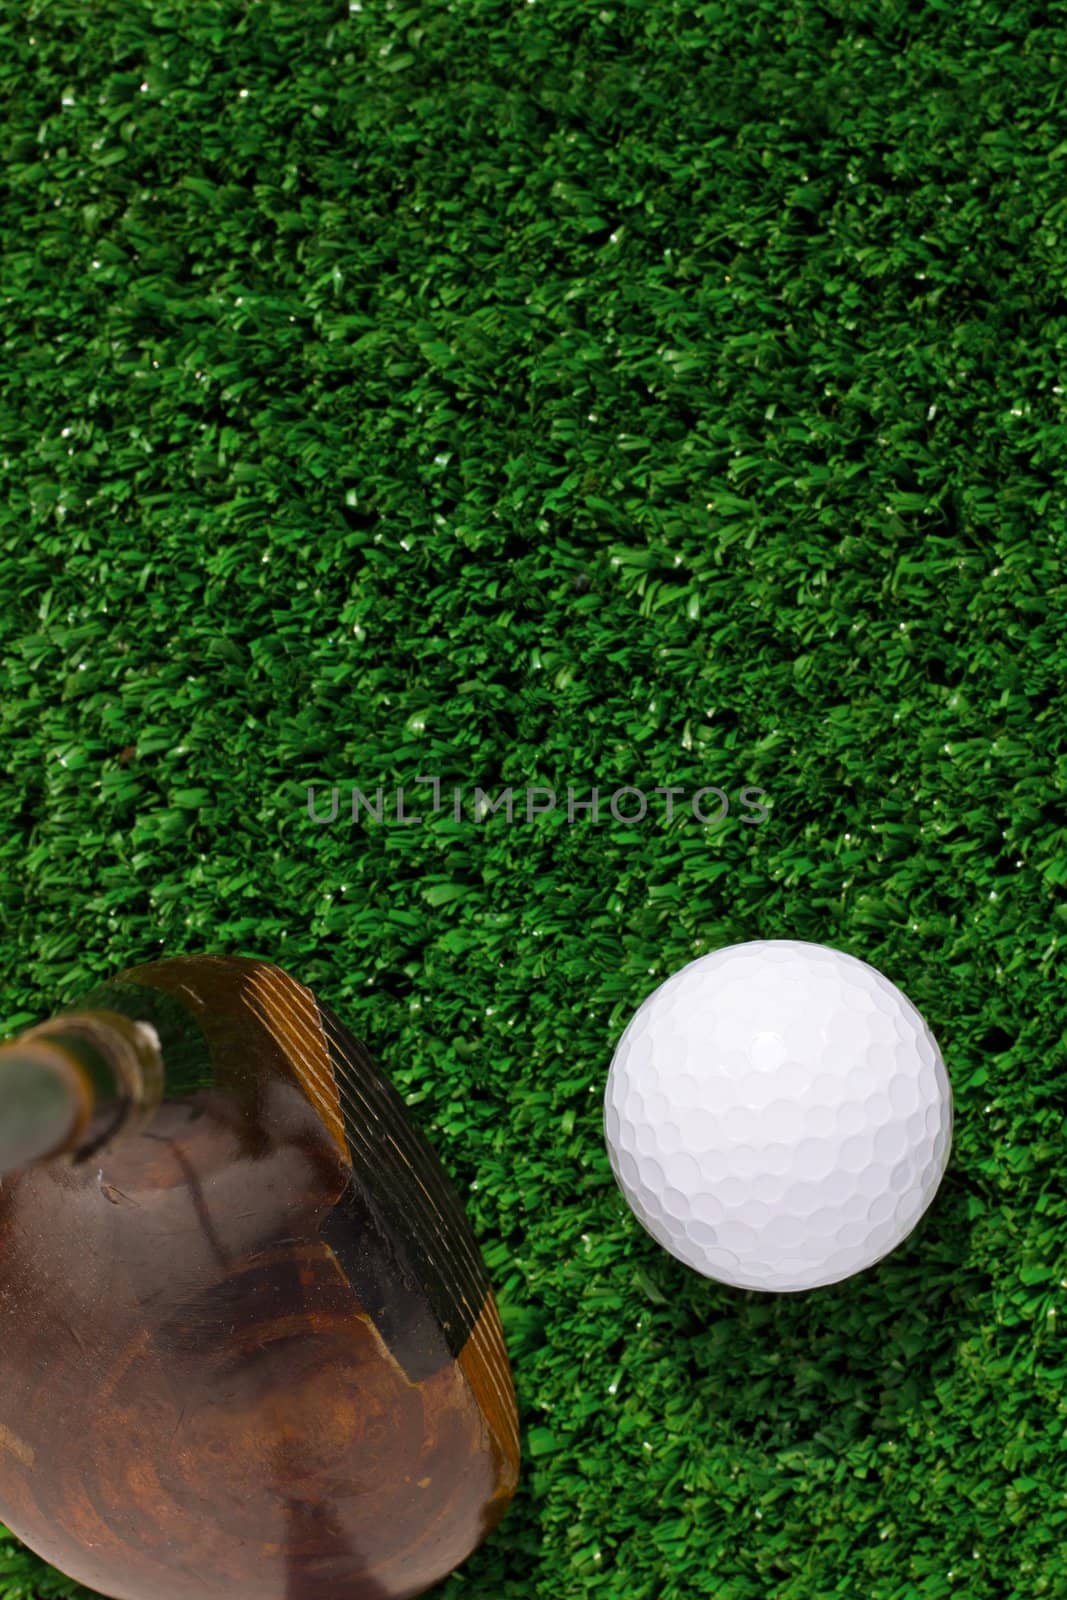 Golf ball and driver on green grass